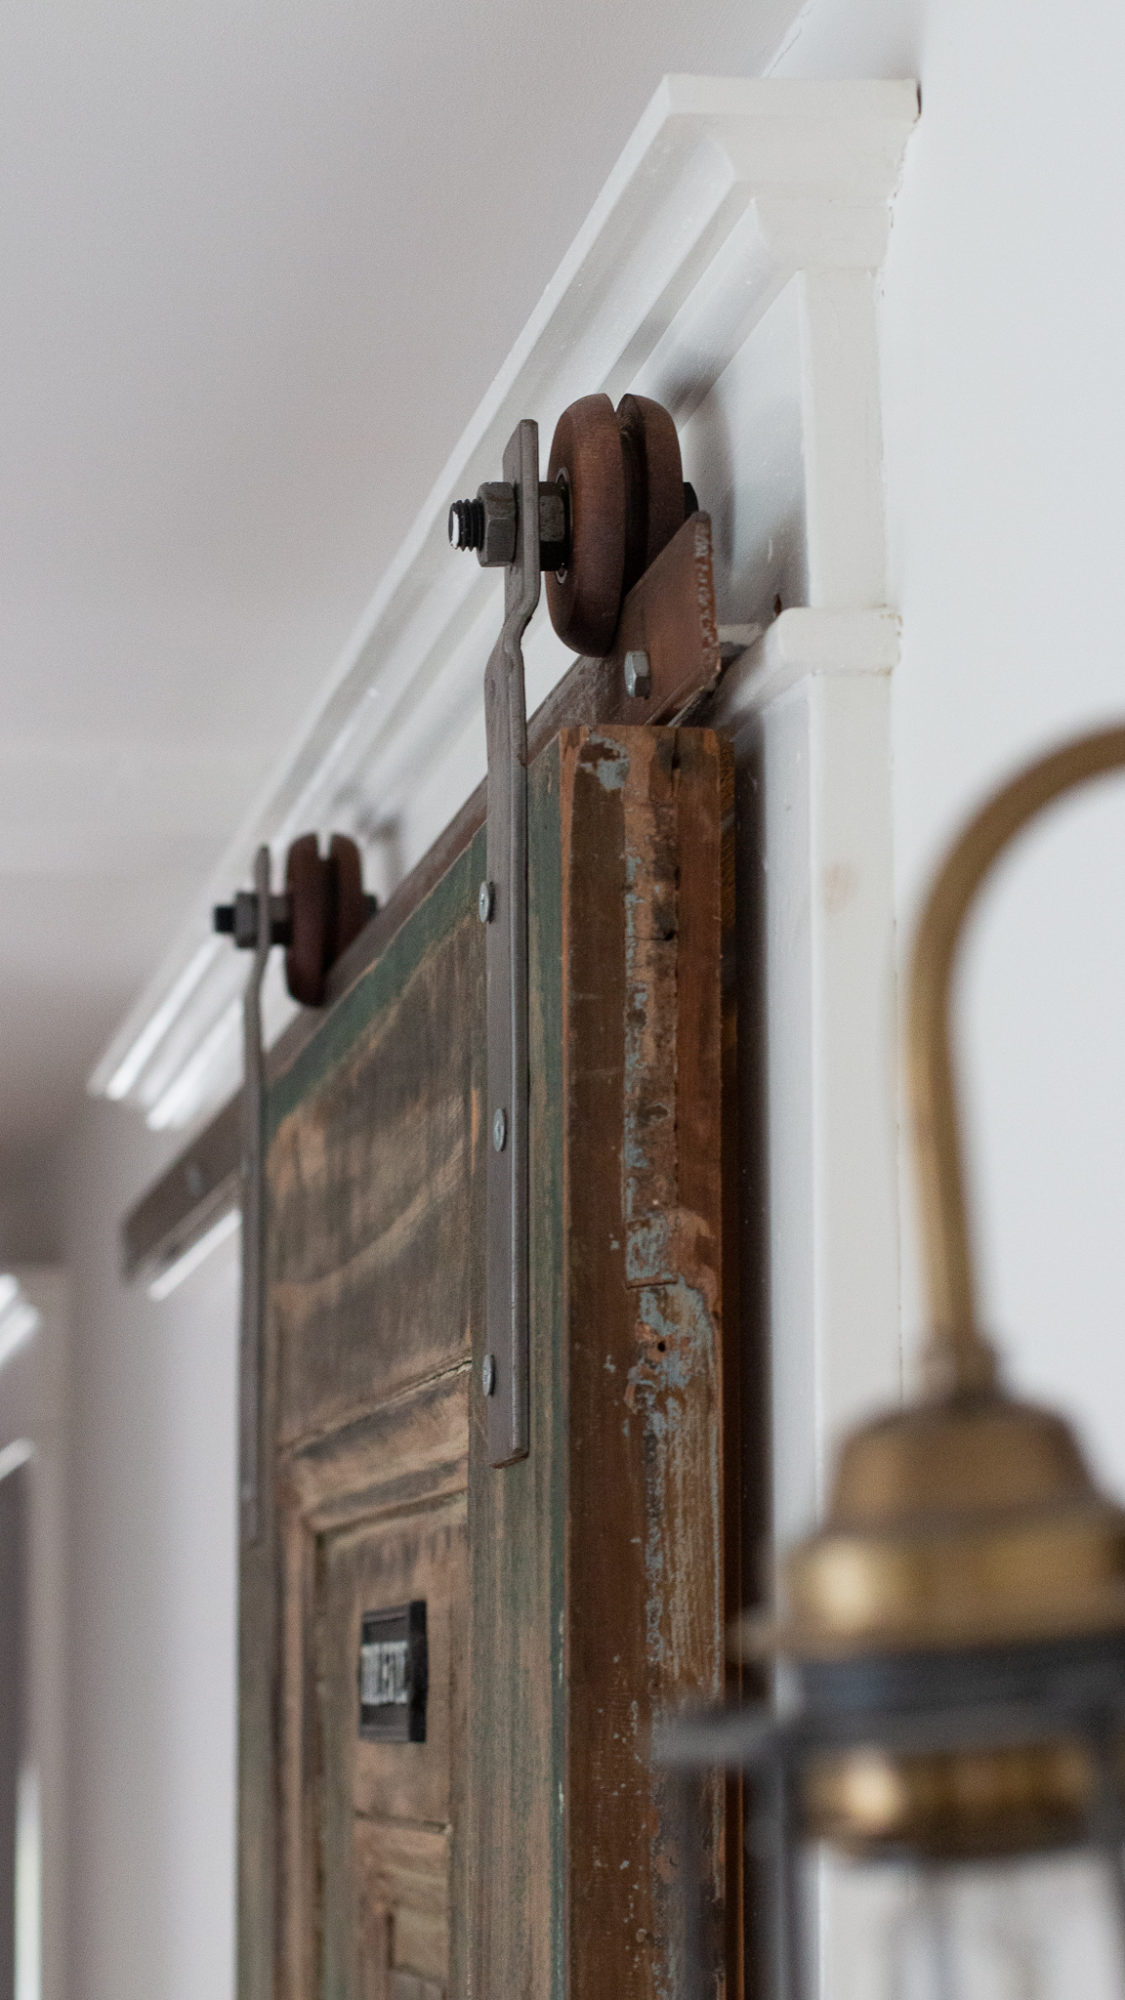 DIY door track hardware : Create your own door track hardware using old vintage doors. We’ll show you how. Save tons of money and have gorgeous art-like doors for your home. 